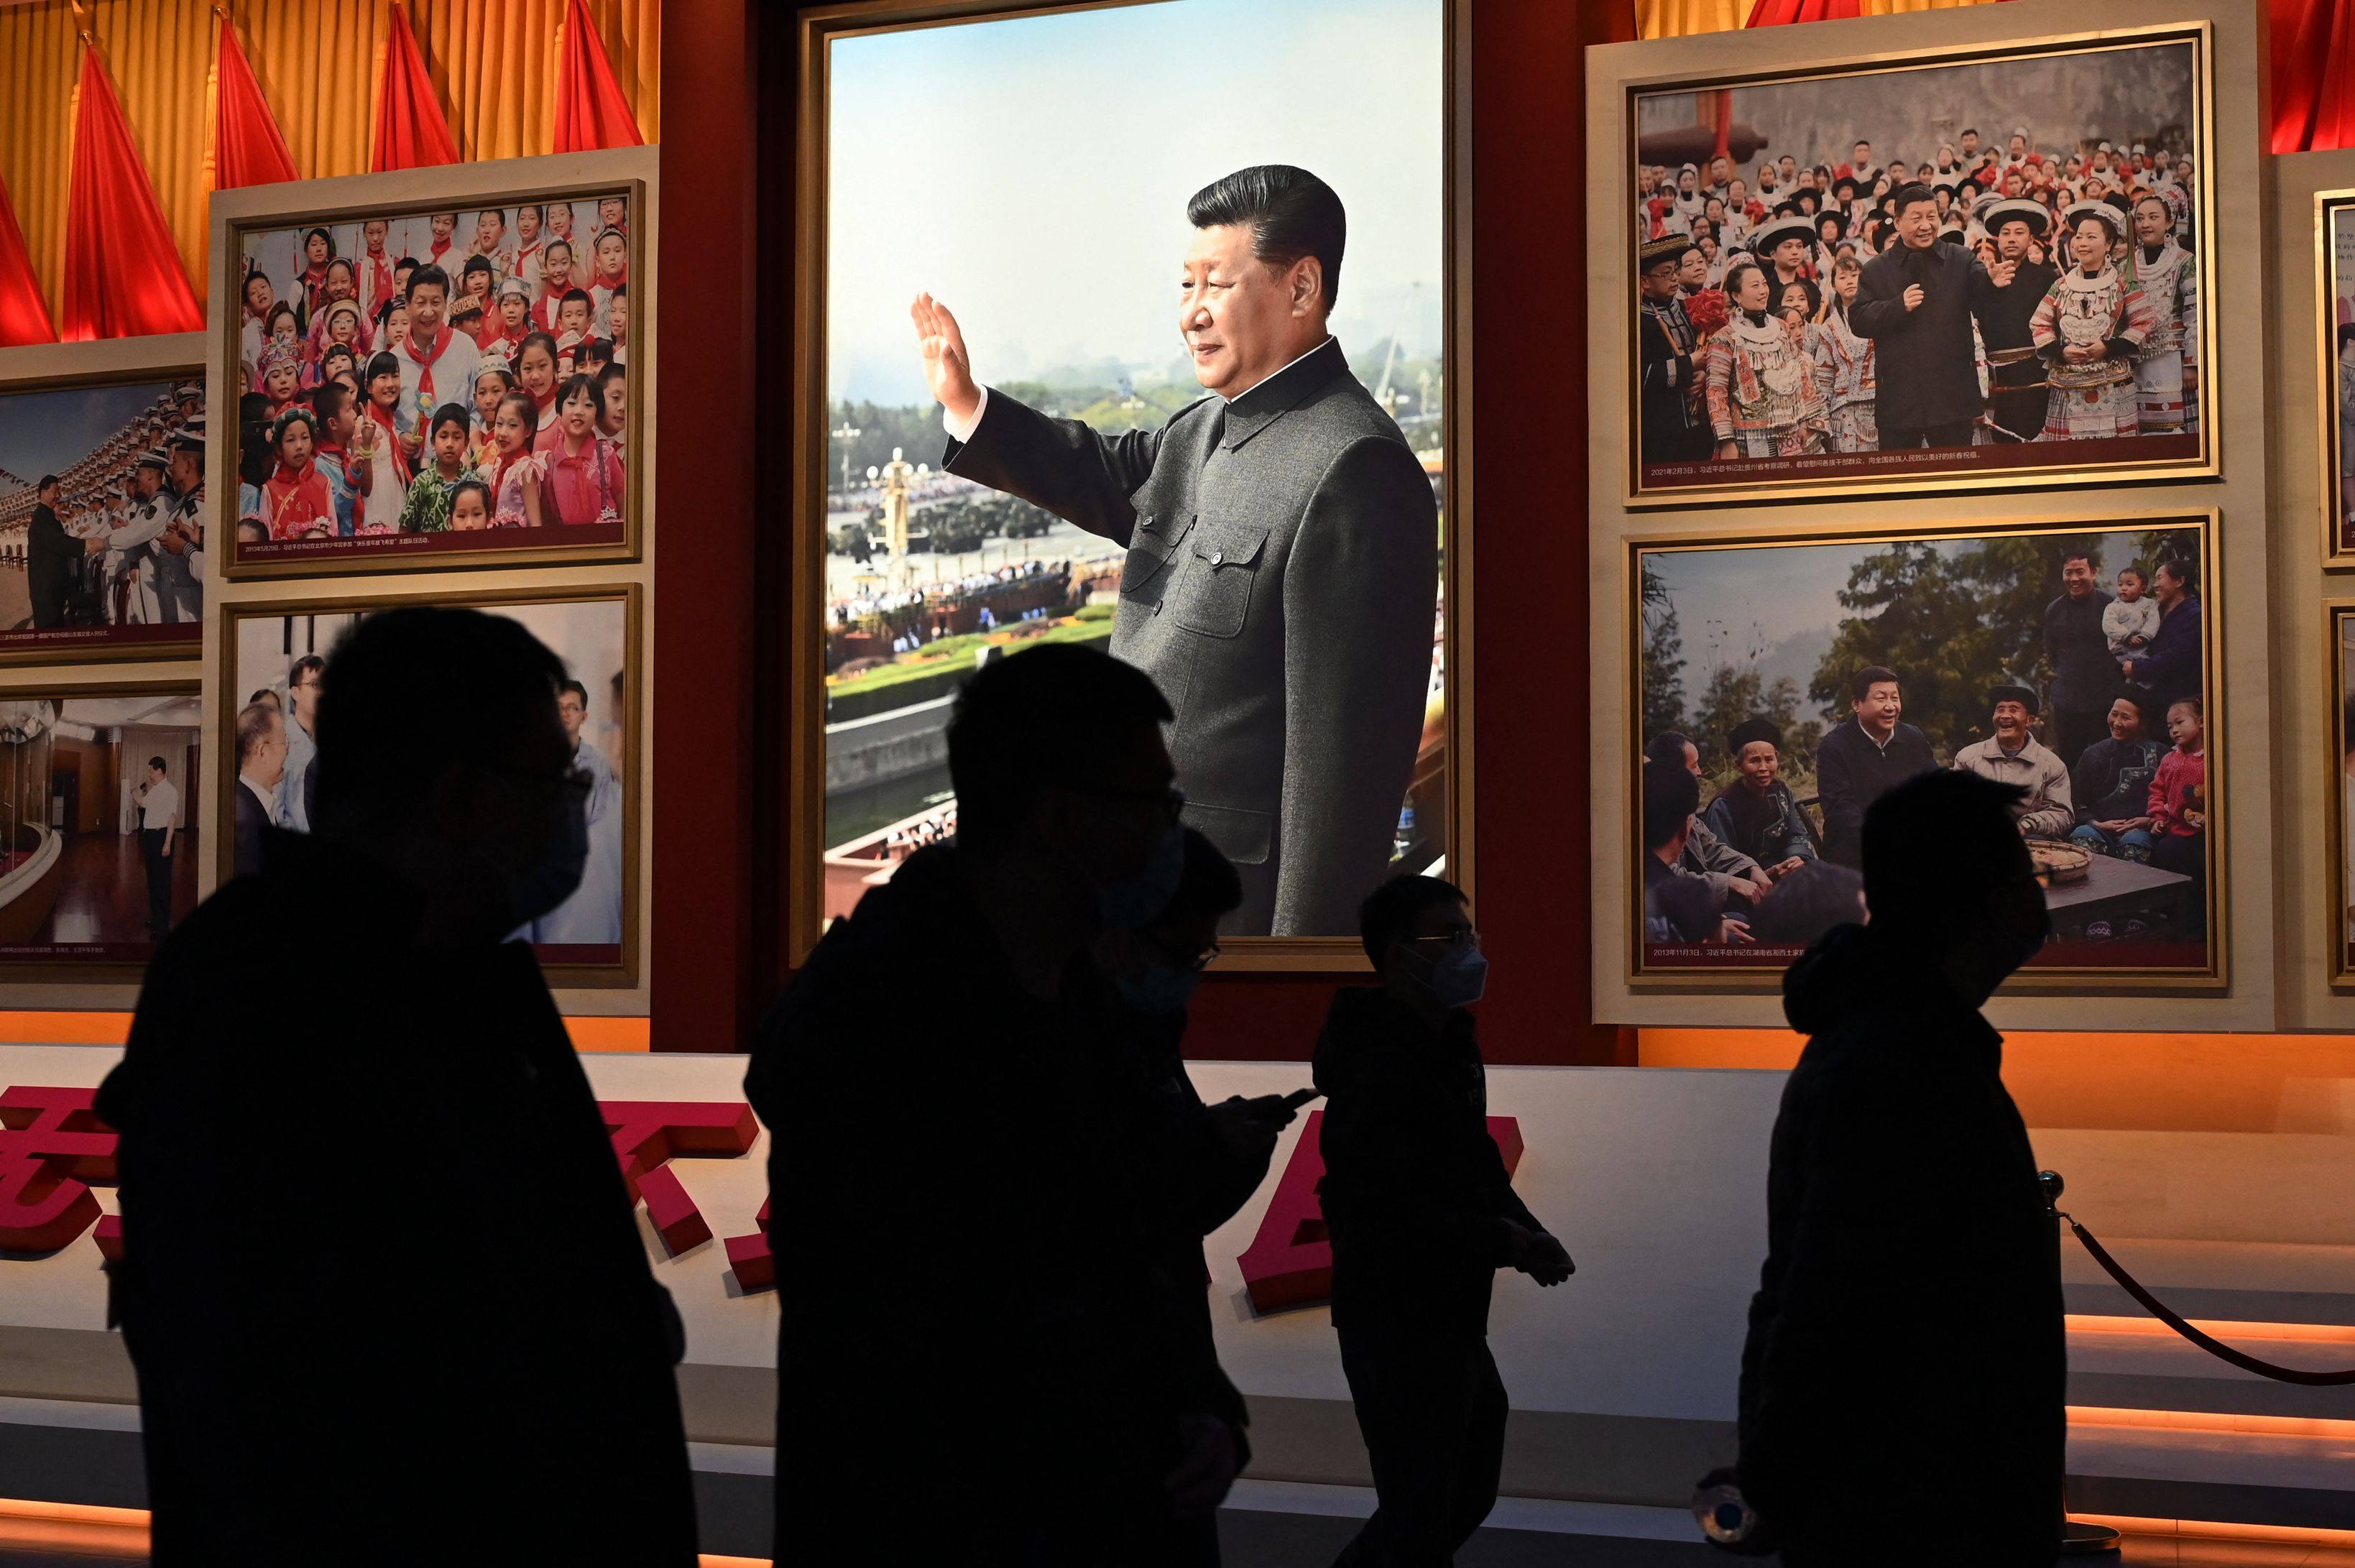 A paper submitted to the Legislative Council has proposed to turn the existing Science Museum into one showcasing China’s achievements. Photo: AFP